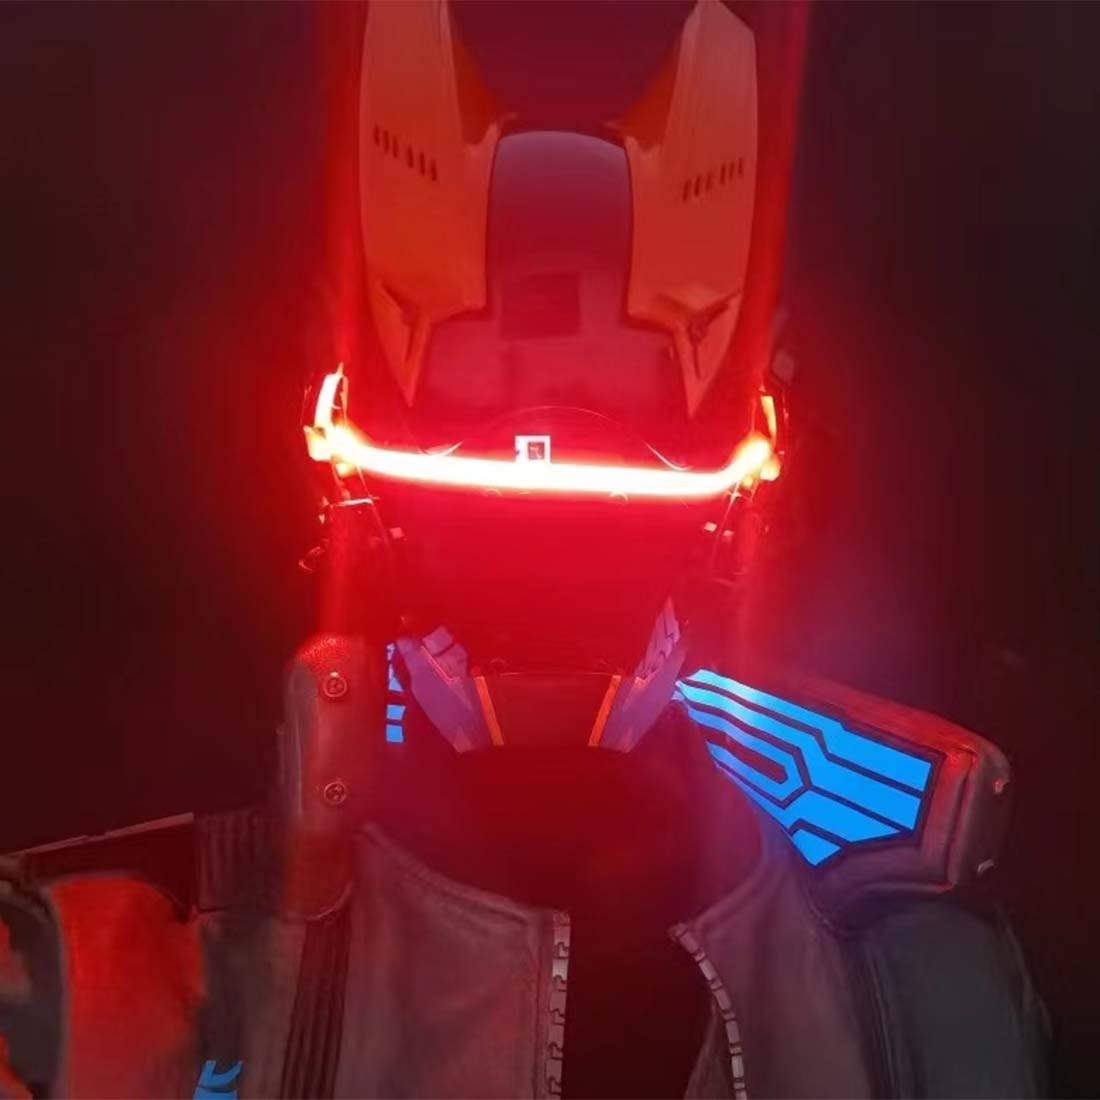 Red LED Punk Mask Futuristic Helmet Cosplay Costume Props for Men